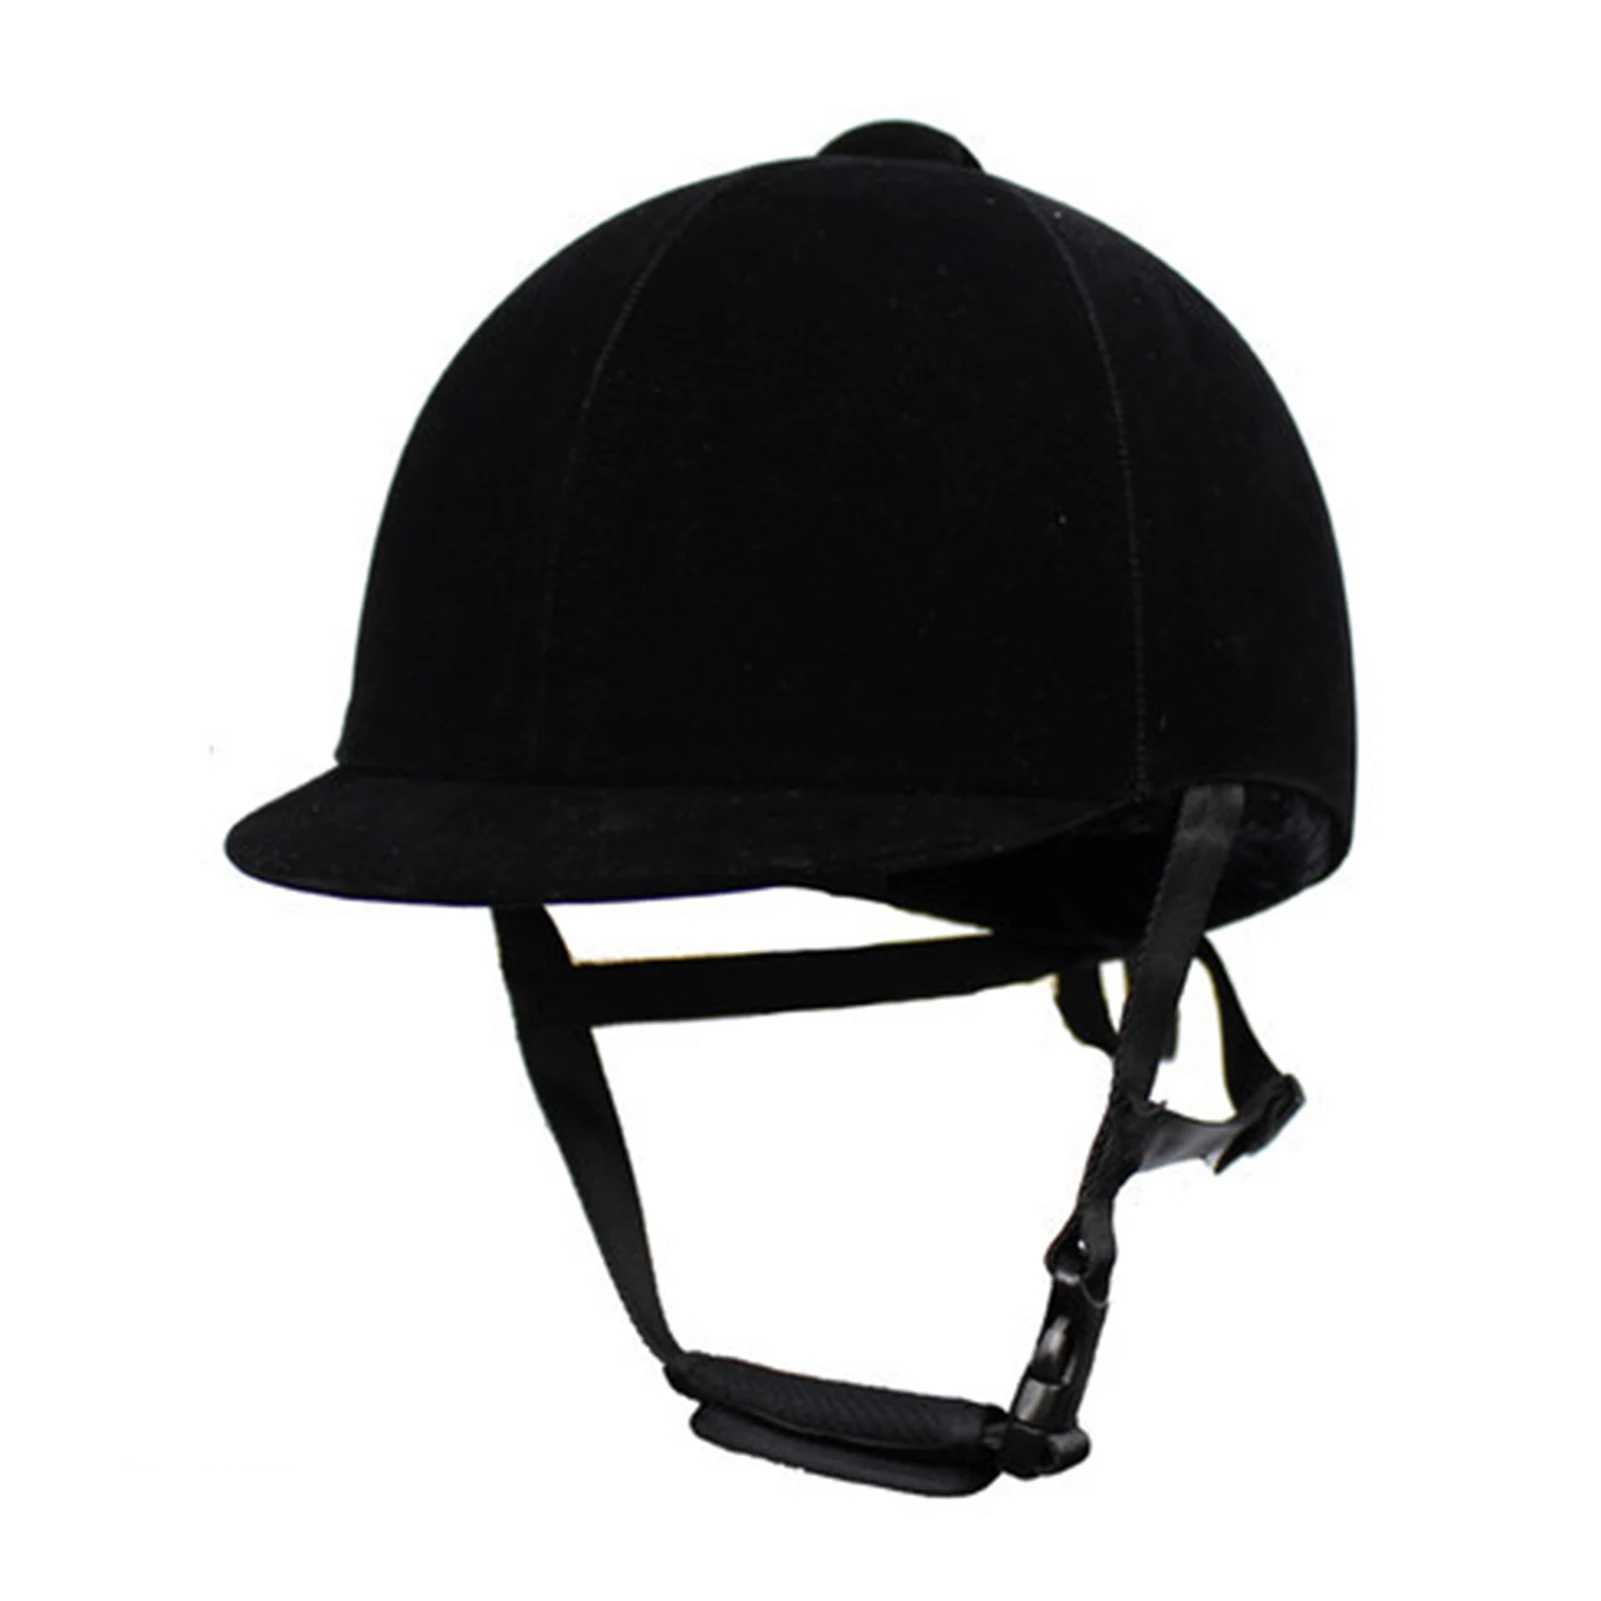 Men Women Anti Impact Adults Horse Riding Hat Cycling Equestrian Helmet Outdoor Sports Comfortable Safety Fashion Velvet Lining